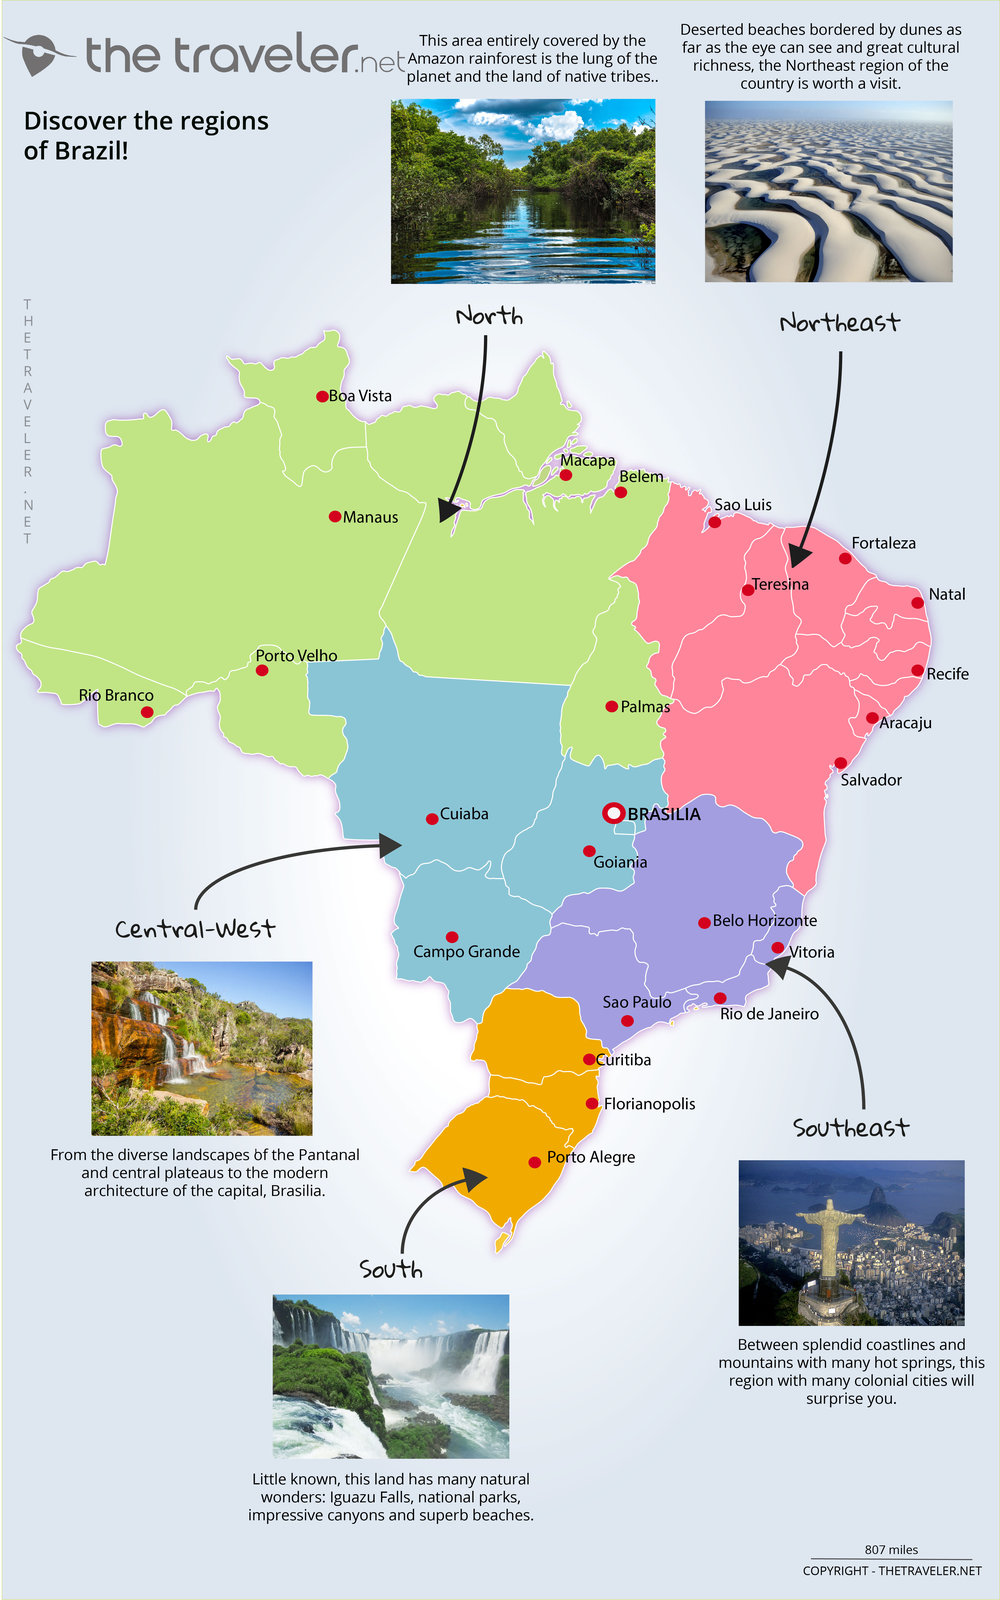 tourist map of brazil Places To Visit Brazil Tourist Maps And Must See Attractions tourist map of brazil